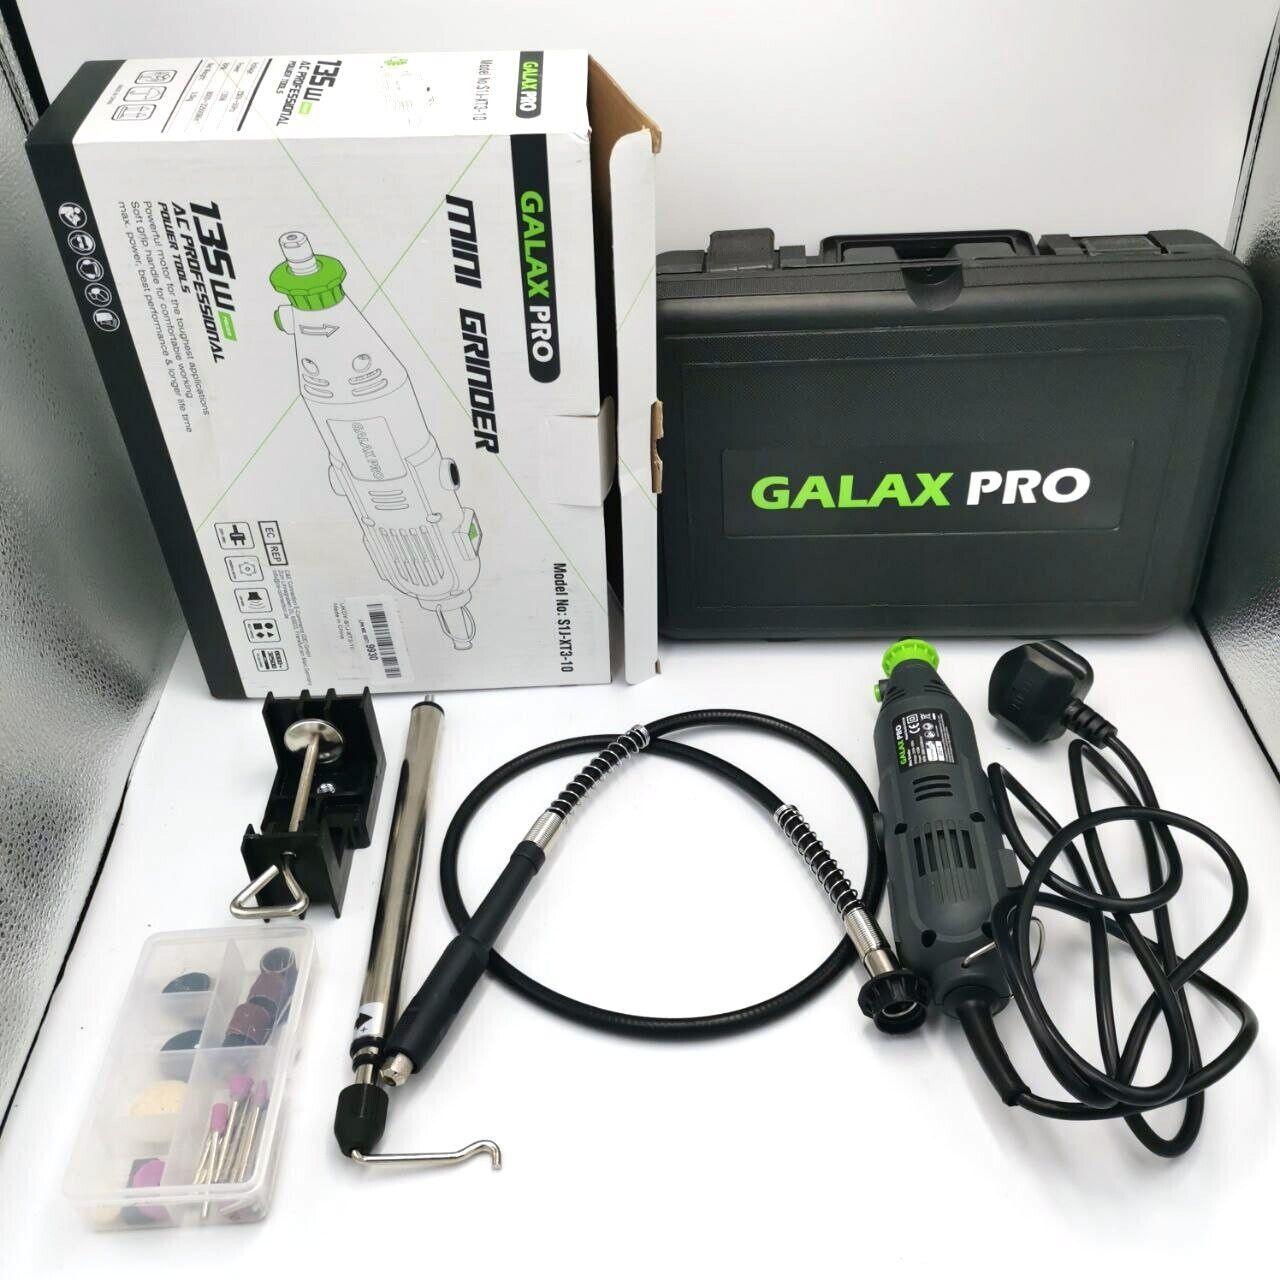 GALAX PRO Rotary Tool Kit, 135W Rotary Variable Speed 8000-32500rpm - Massive Discounts